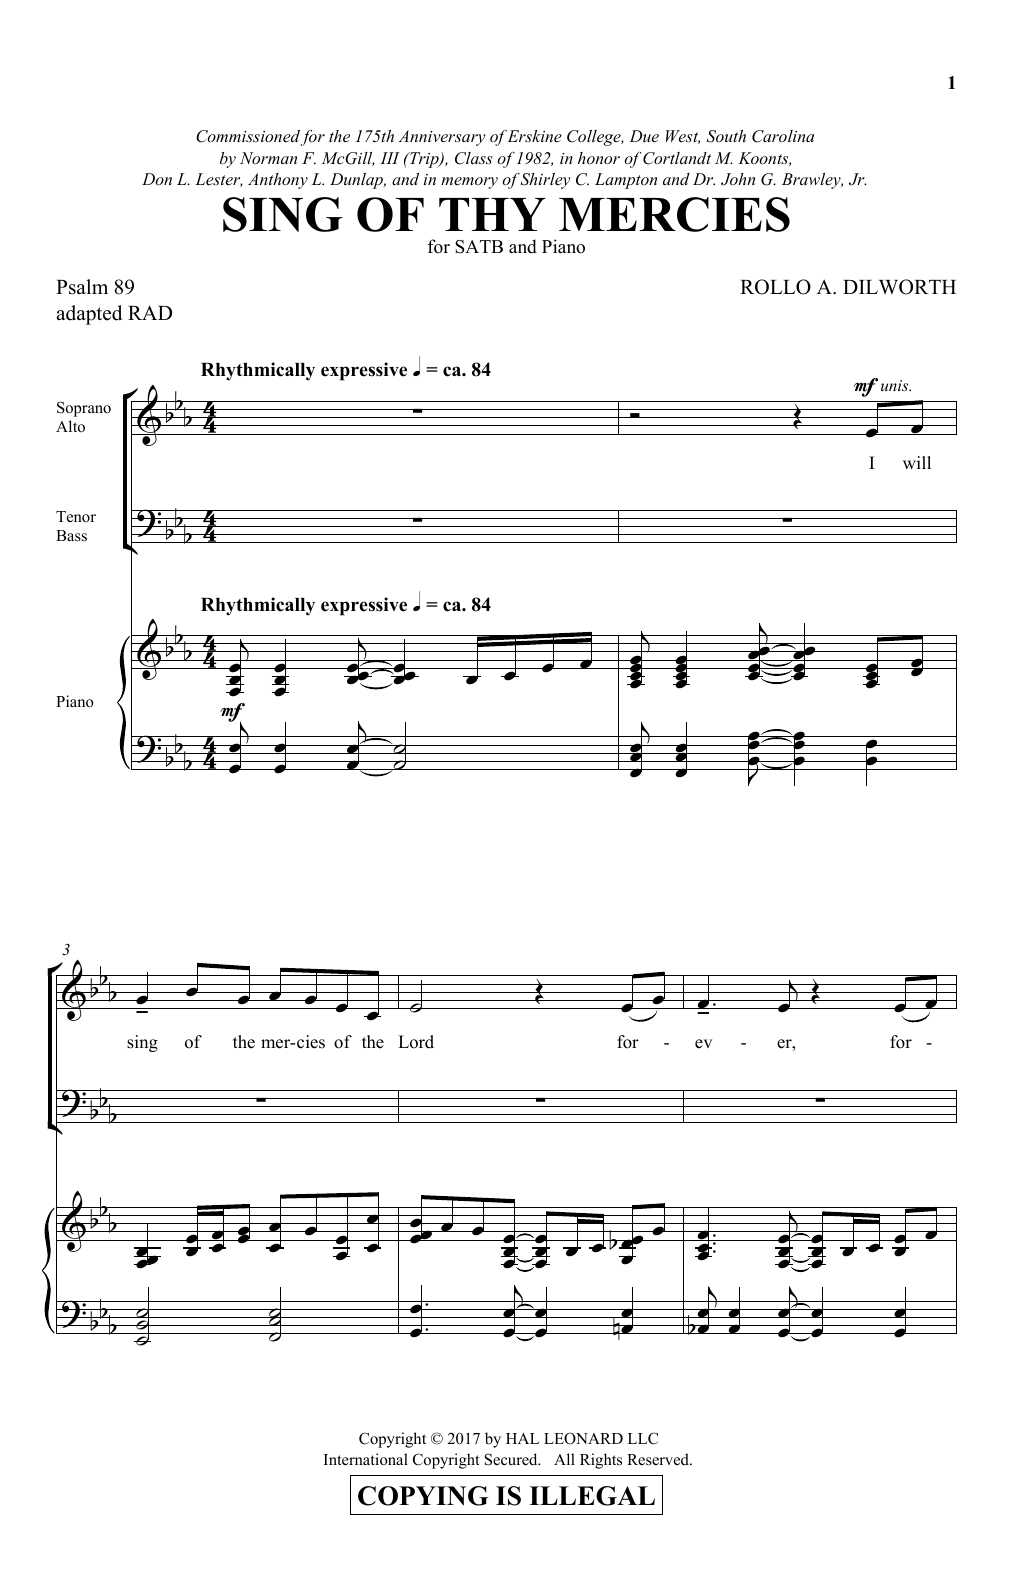 Download Rollo Dilworth Sing Of Thy Mercies Sheet Music